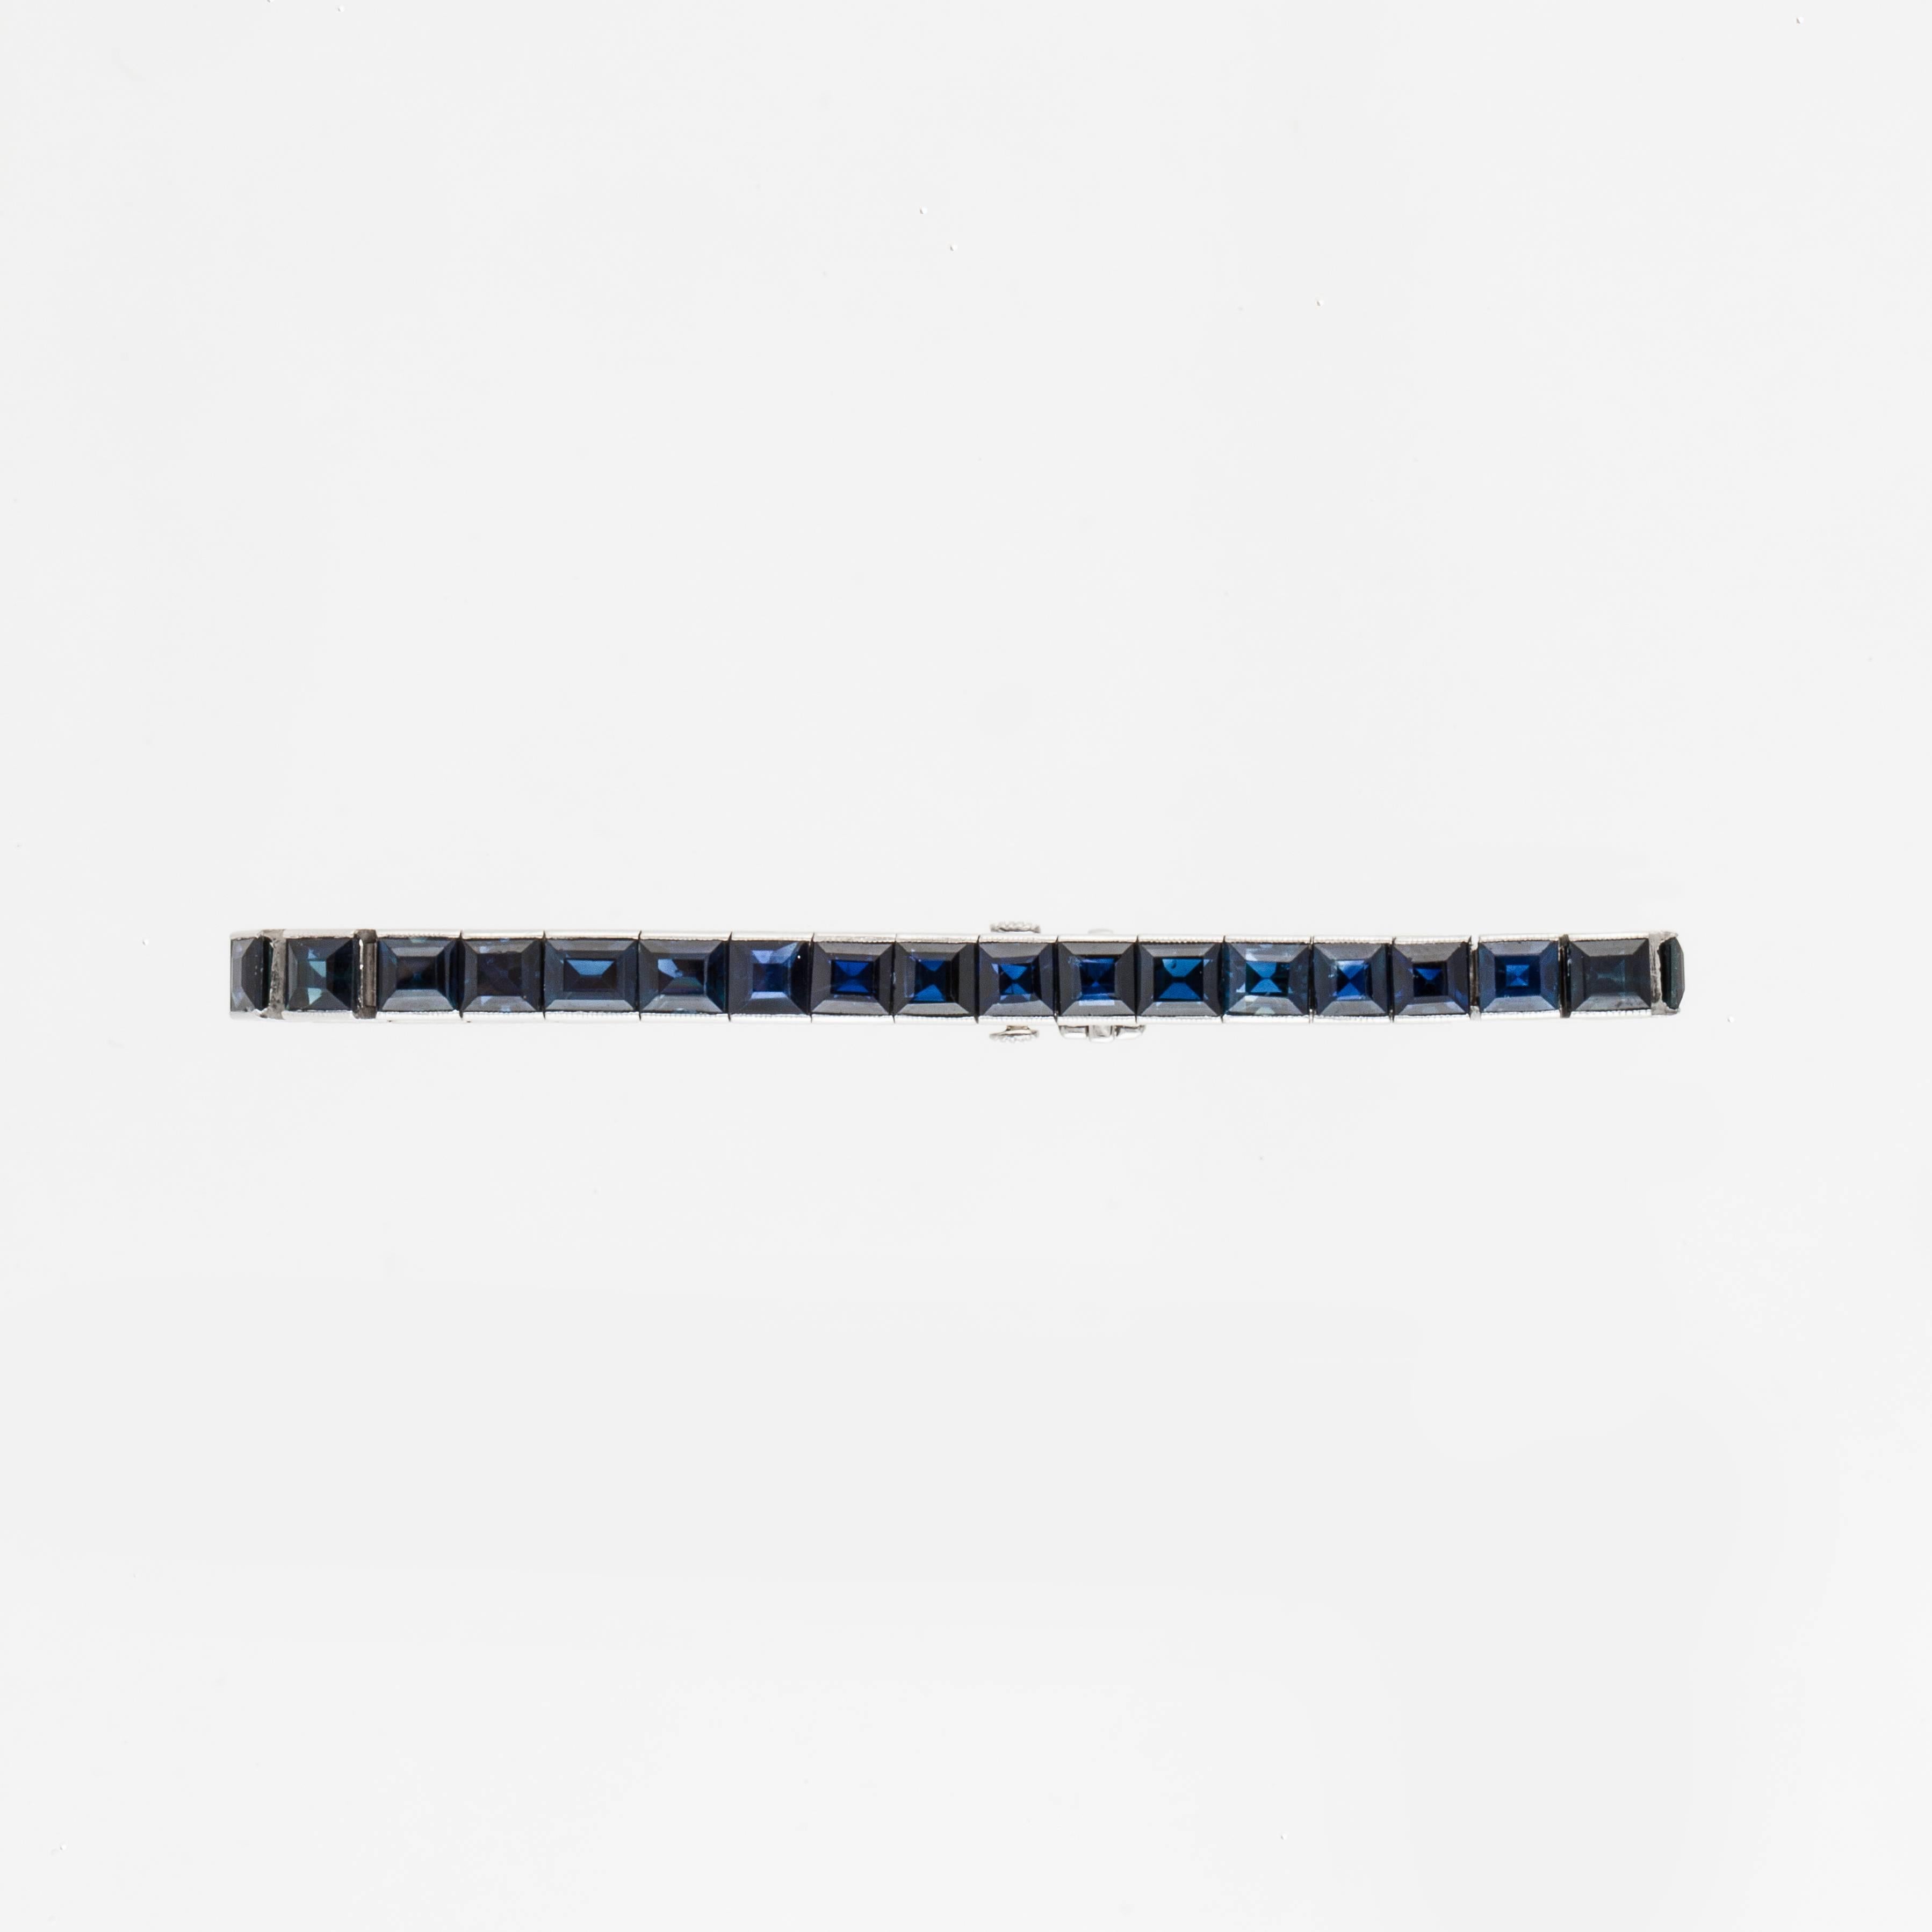 Black Starr & Frost platinum line bracelet featuring thirty-six (36) square-cut sapphires that total 27 carats.  There is beautiful engraving along the outside edges.  Bracelet has a tongue closure with safety and measures 6.5 inches in length and